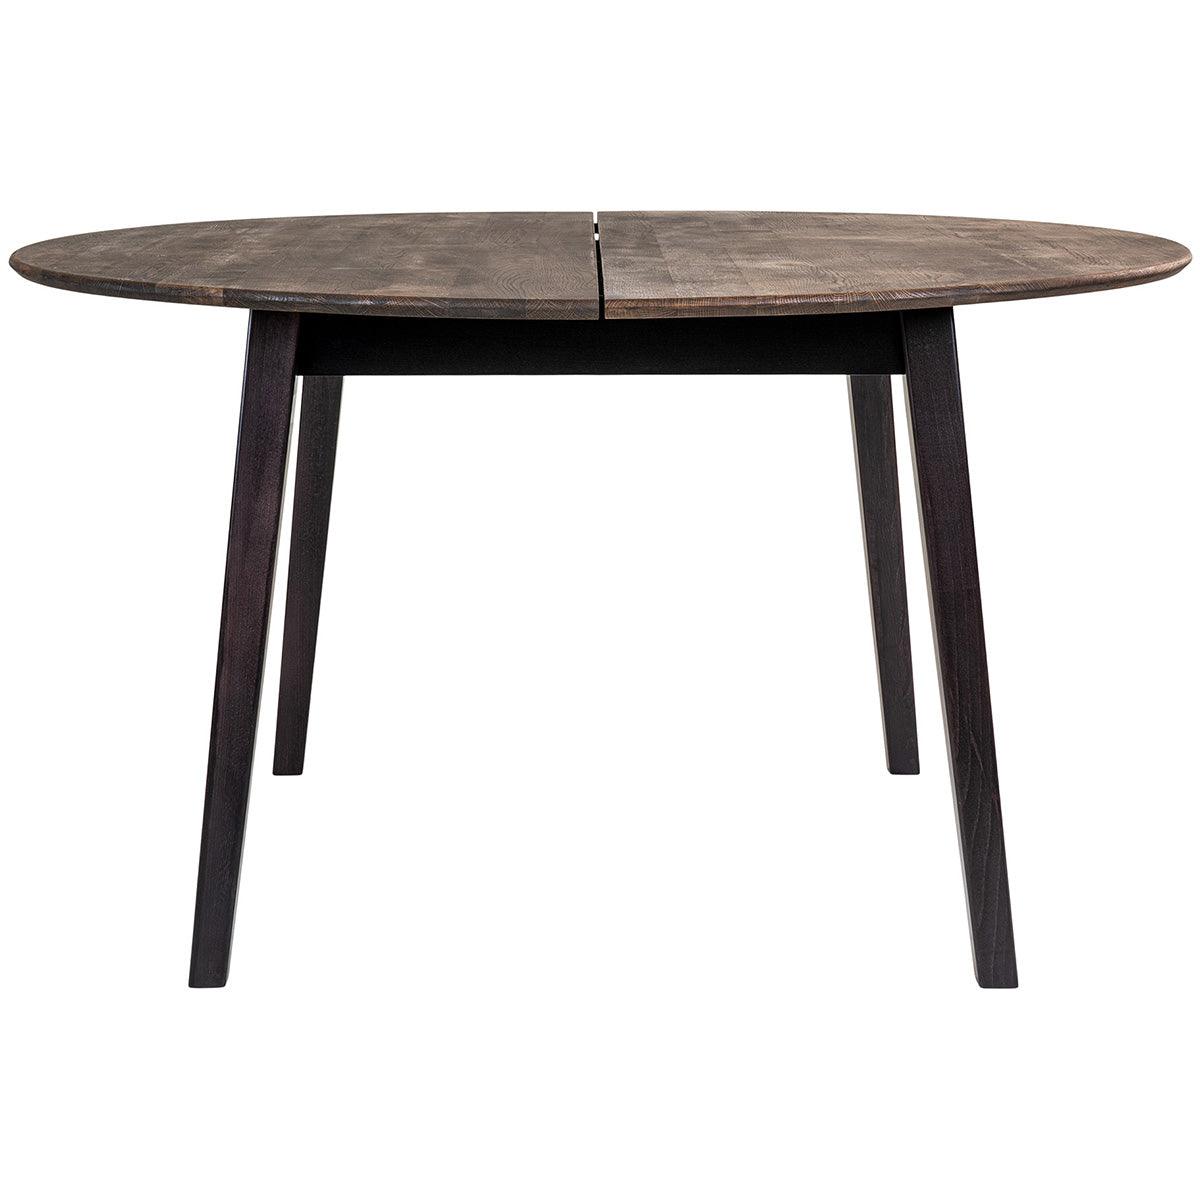 Marseille Oiled Oak Round Dining Table - WOO .Design